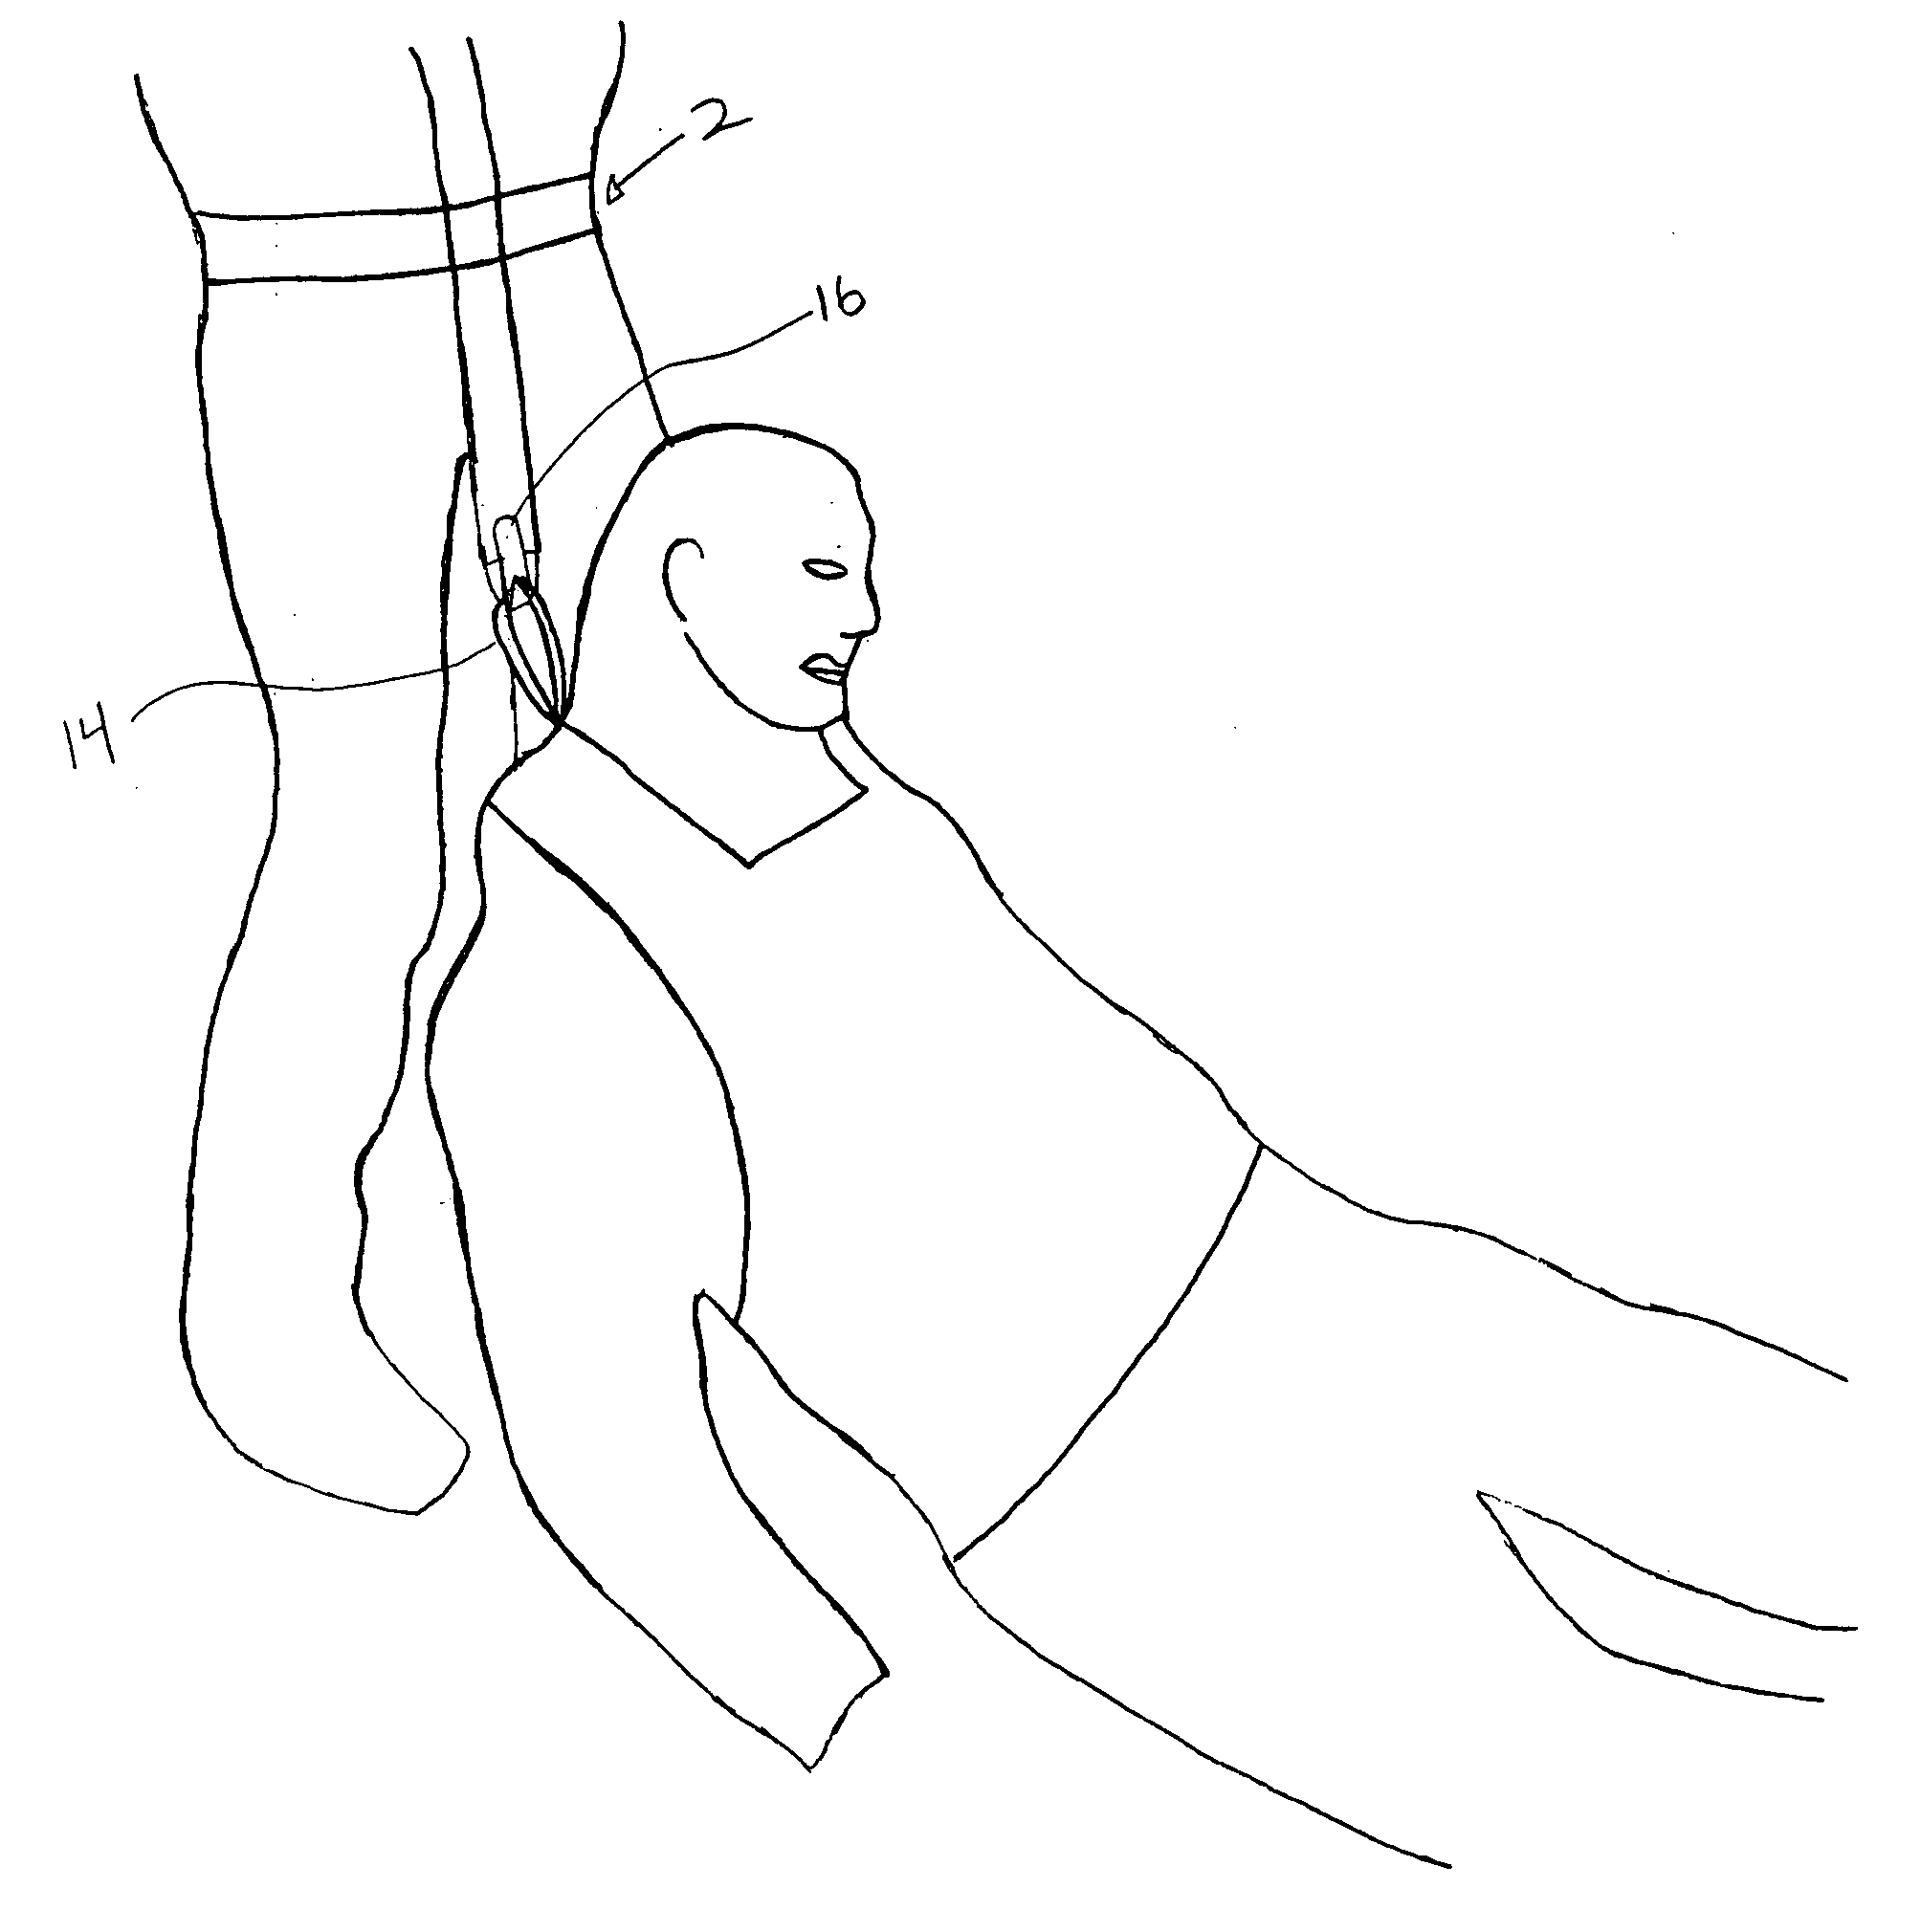 Personal extraction harness